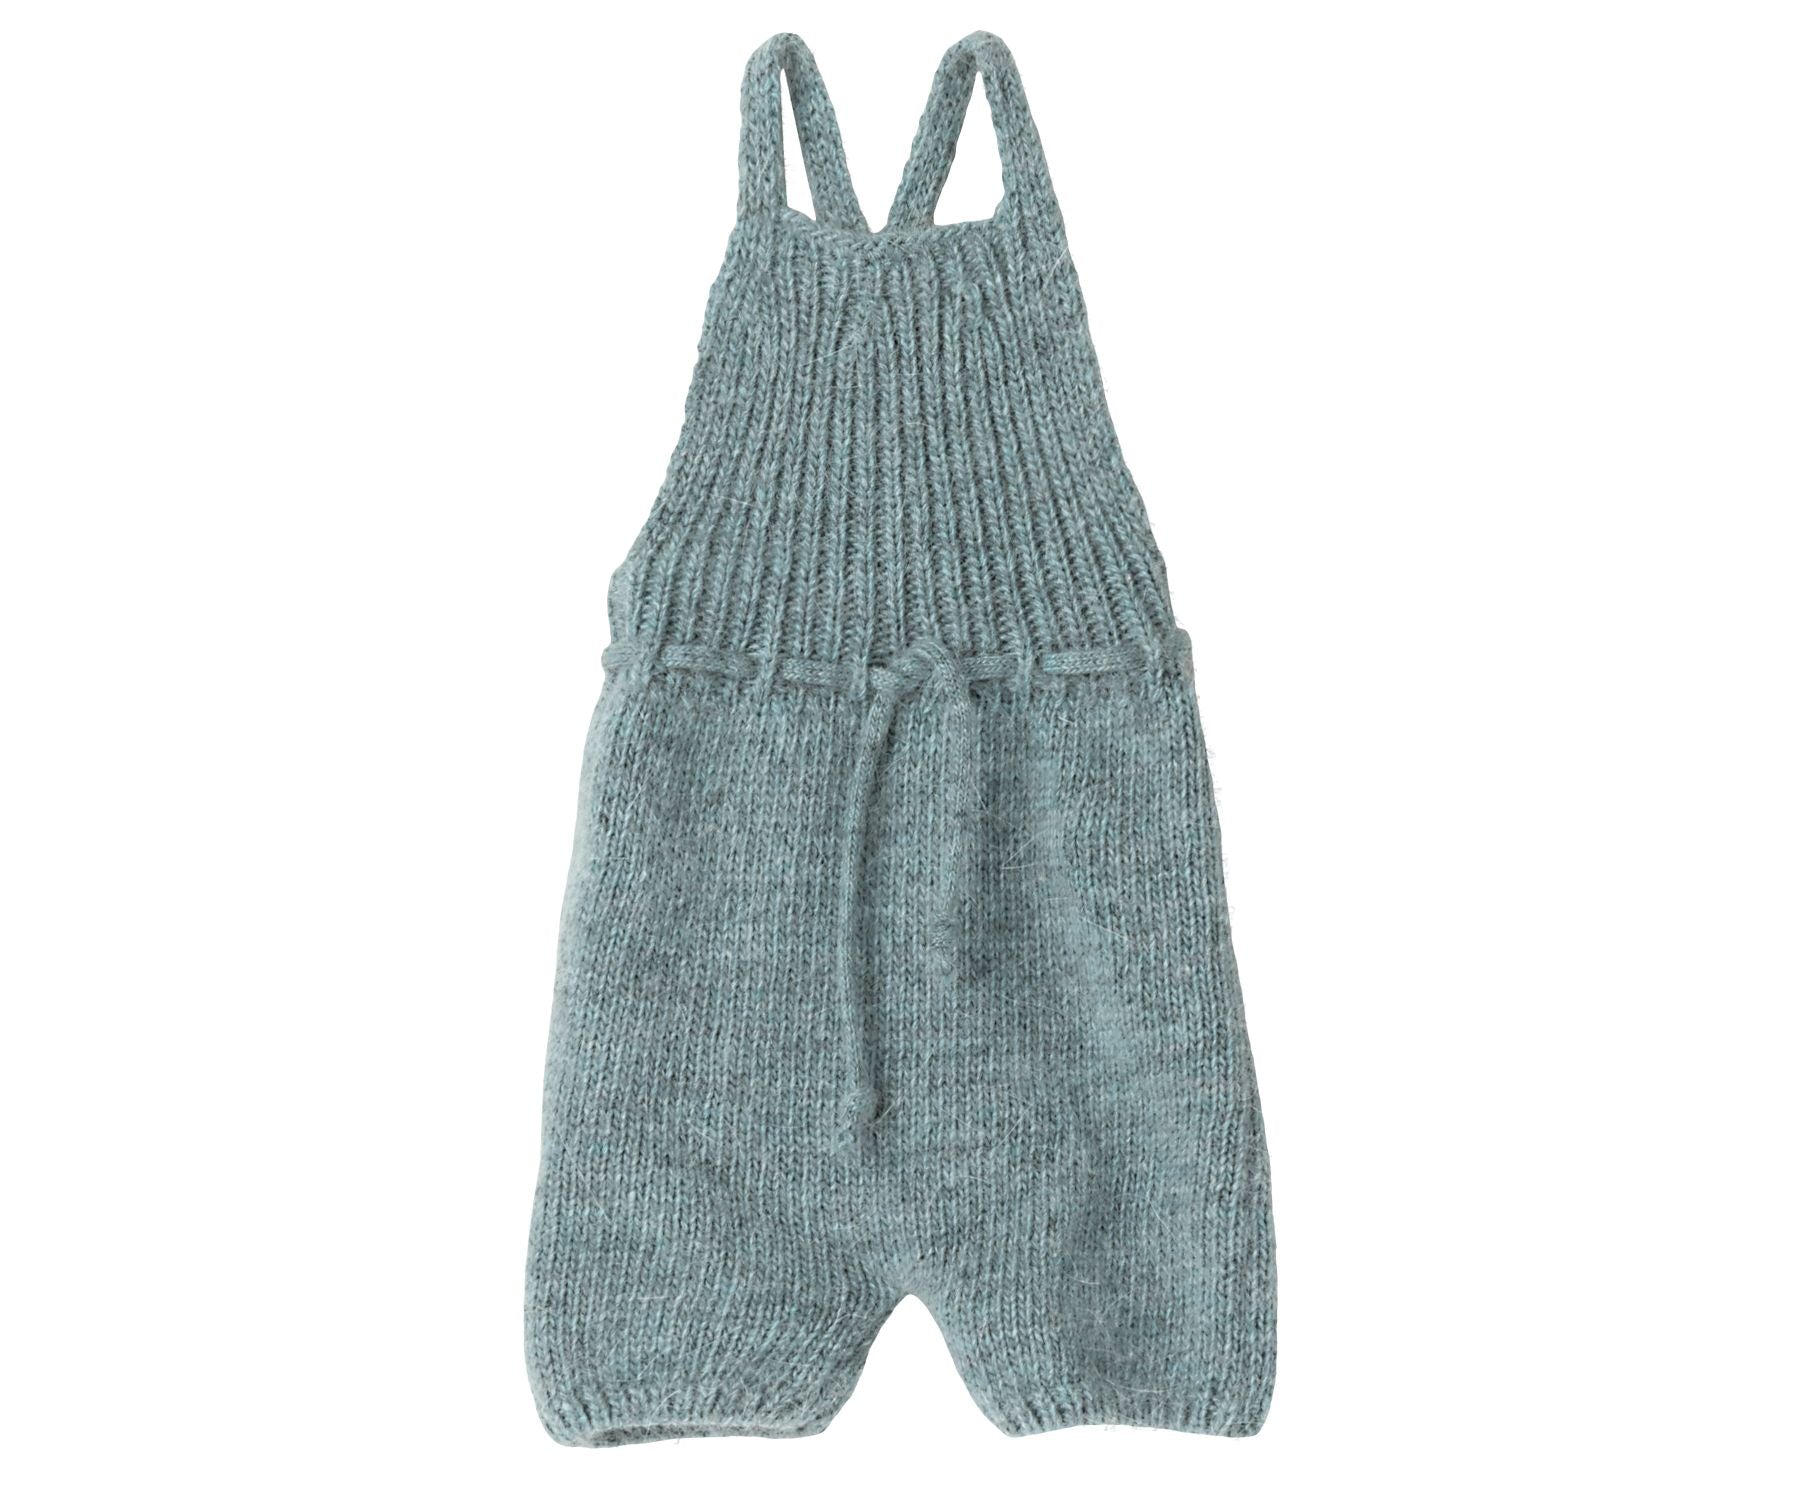 2022 Maileg Knitted Overalls-Size 4, Blue